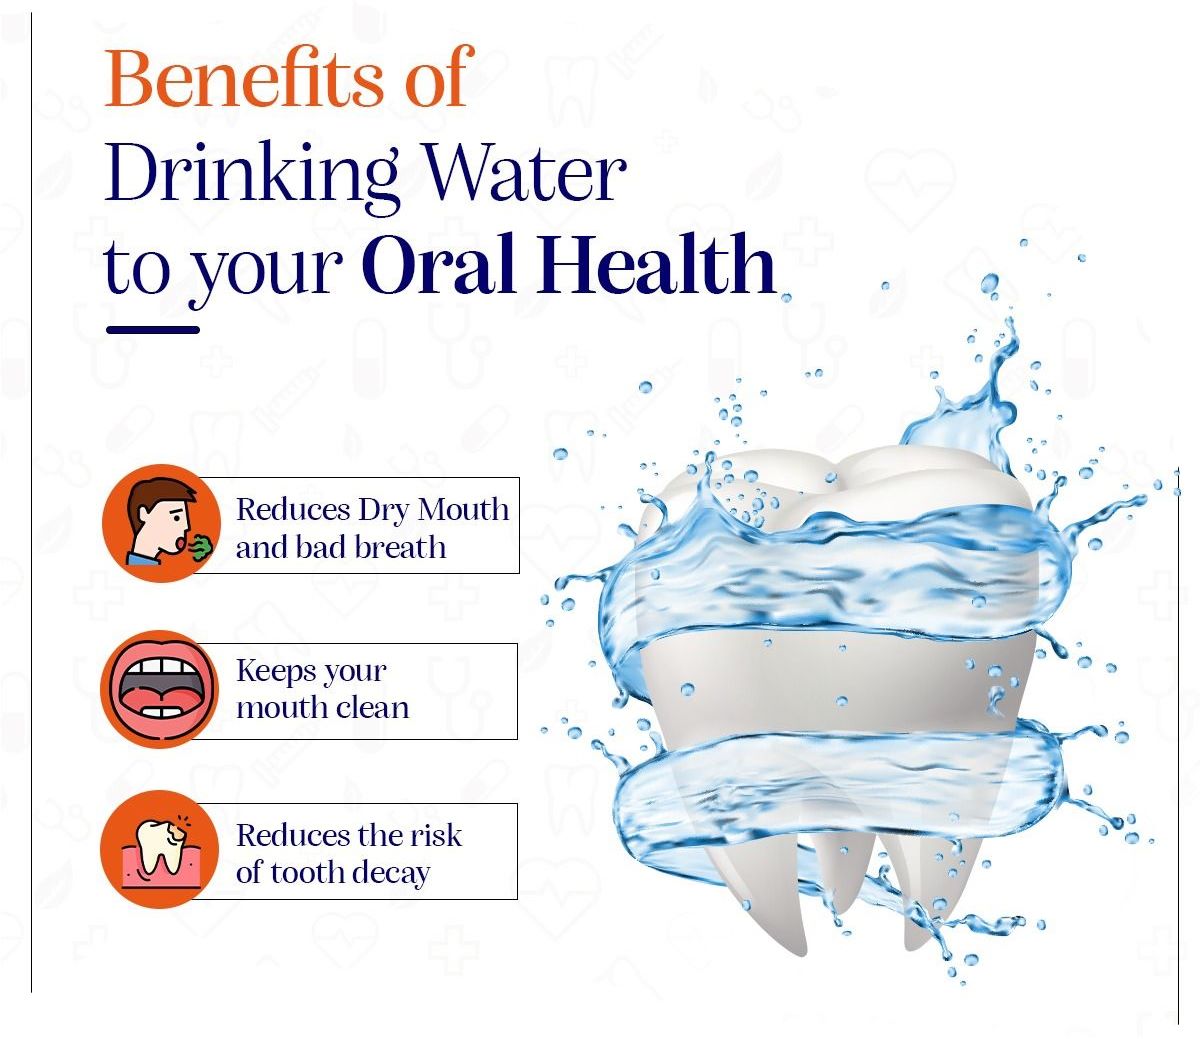 Start your Friday with a smile by staying hydrated.  Drinking plenty of water helps wash away food particles and bacteria, reduces dry mouth, and promotes saliva production, which is essential for protecting your teeth and gums. Have a refreshing day ahead! #oralhealth